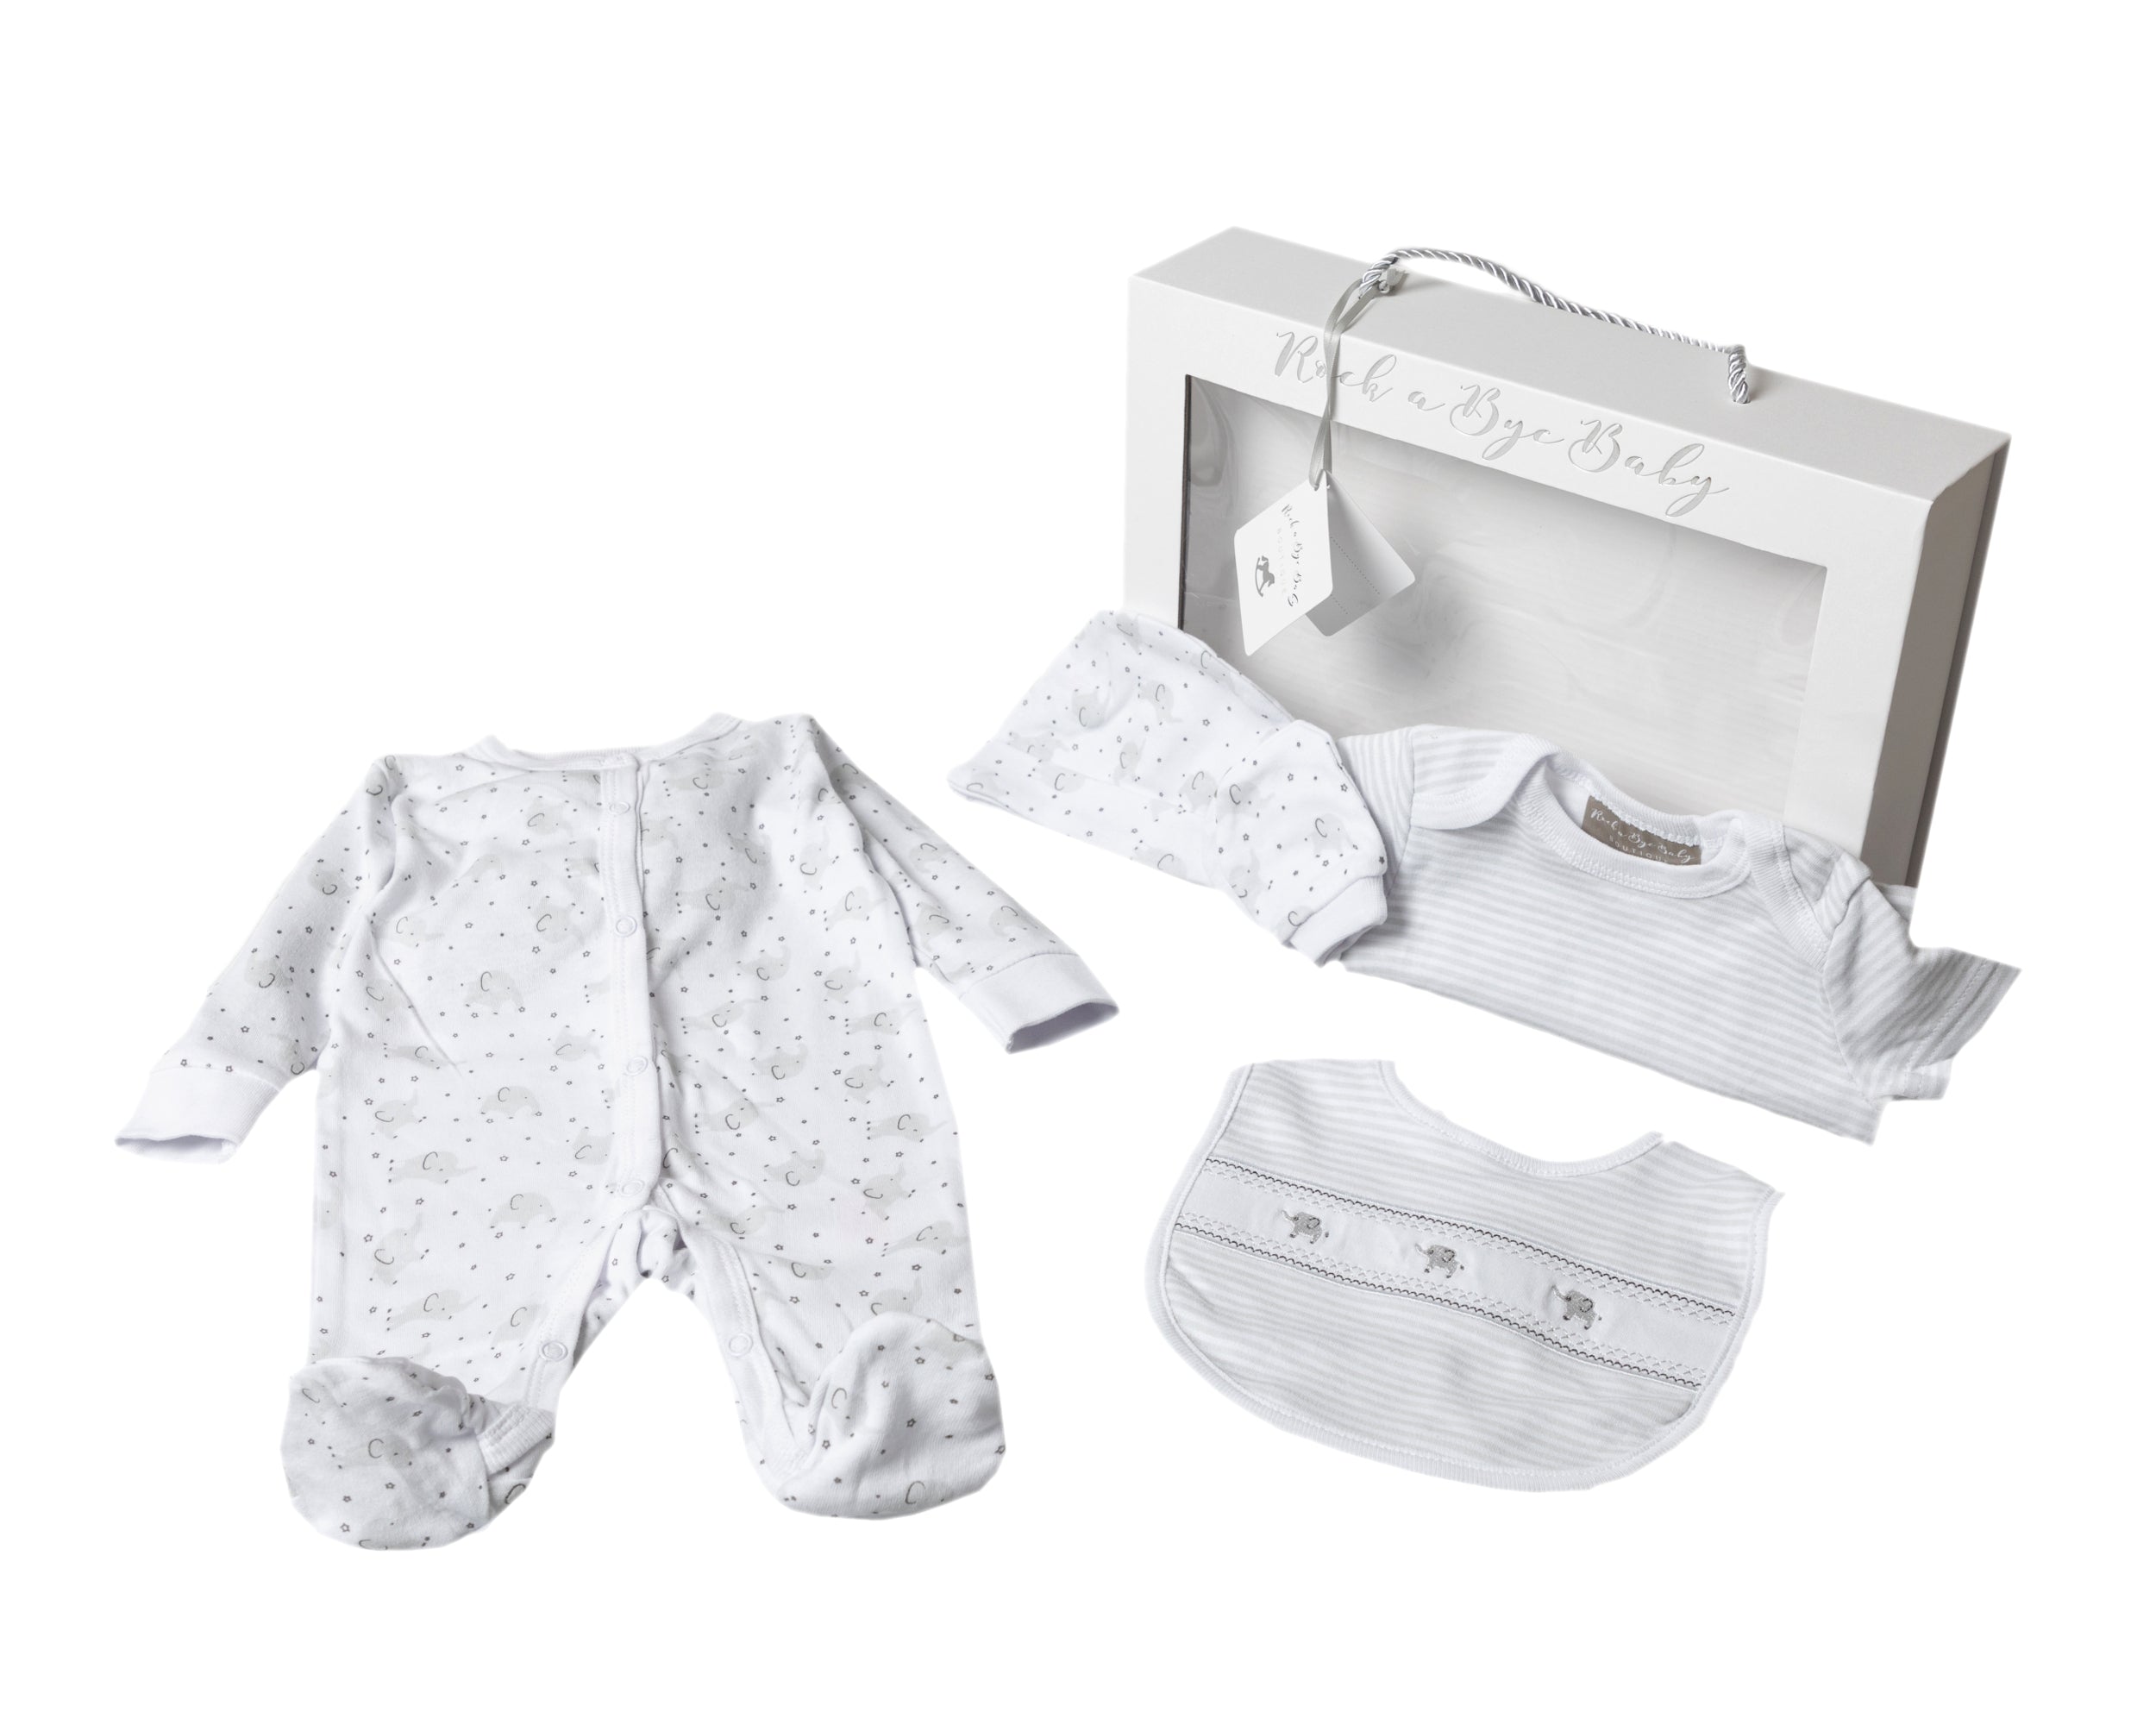 Our Little Elephants Unisex Gift Set is the perfect choice for any new arrival. Complete with a gorgeous sleepsuit, hat and mittens set, it’s sure to impress your friends and family